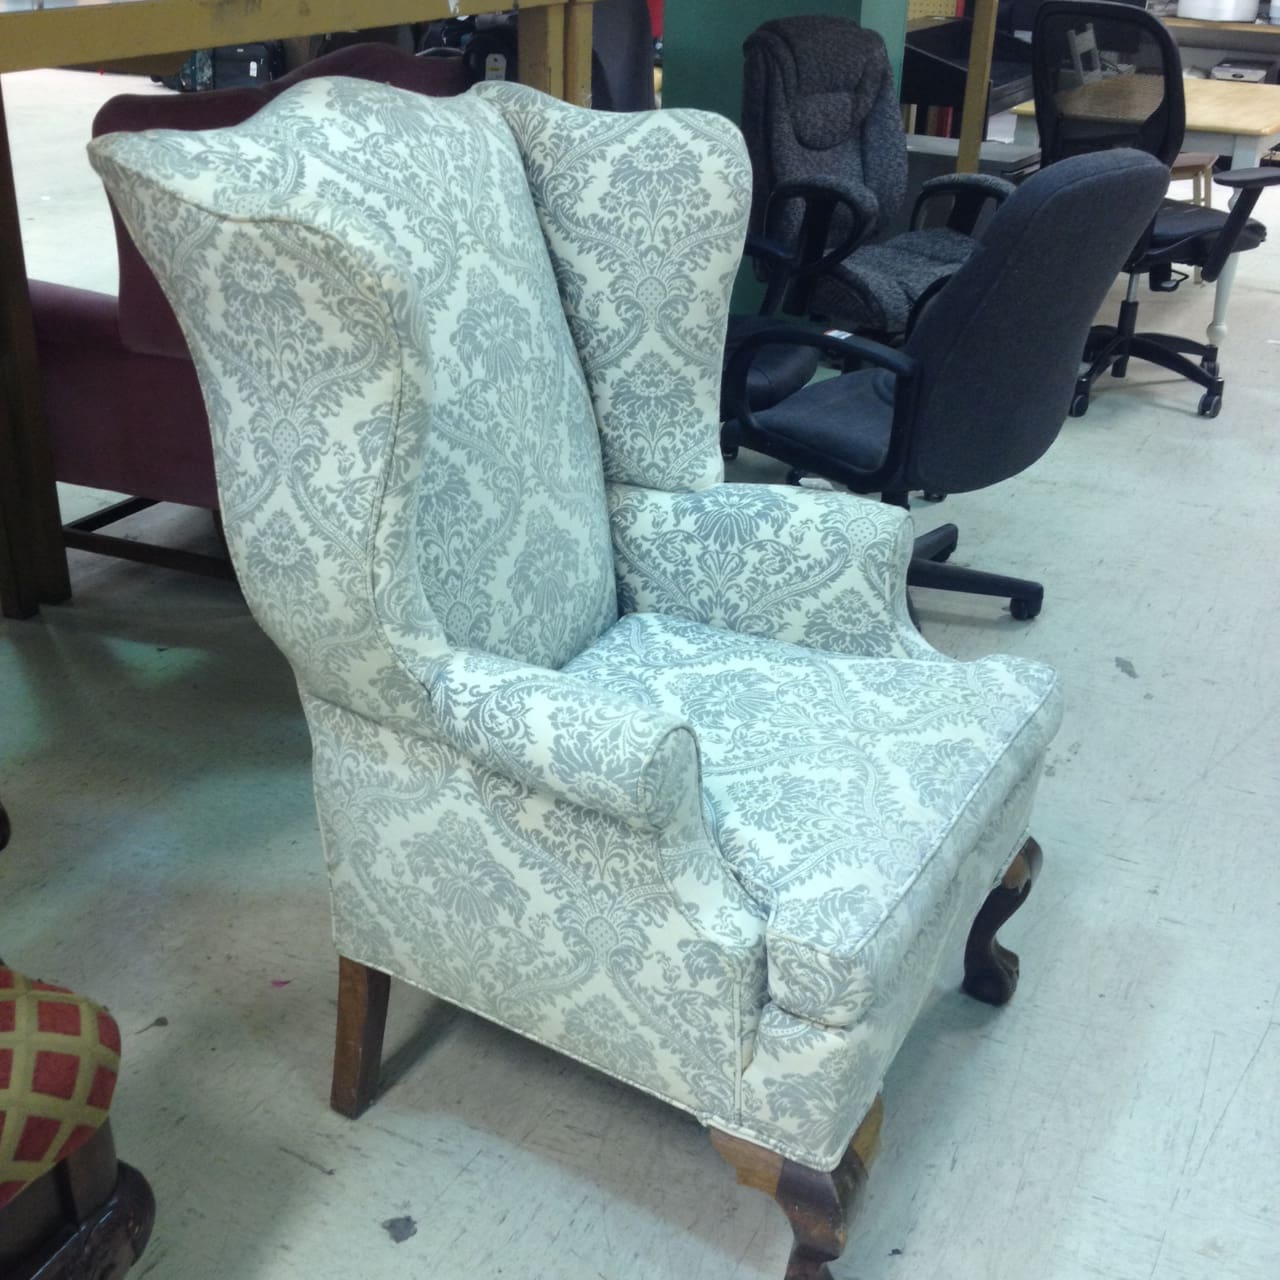 How To Reupholster A Wingback Chair, How To Reupholster A Wingback Chair Uk